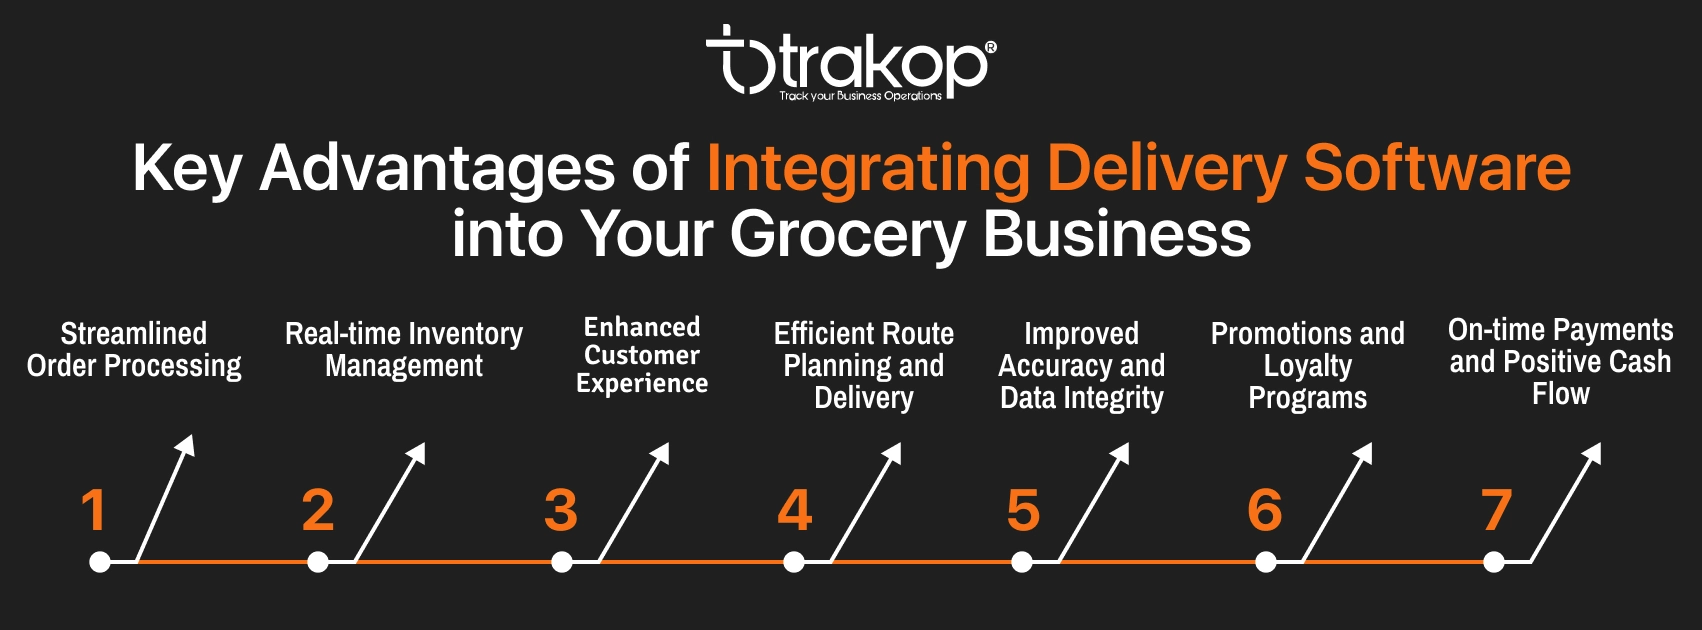 ravi garg, trakop, order processing, inventory management, customer experience, route planning and delivery, accuract and data integrity, promotions and loyalty programs, data-driven decisions, cost savings, scalability, on-time payments positive cash flow